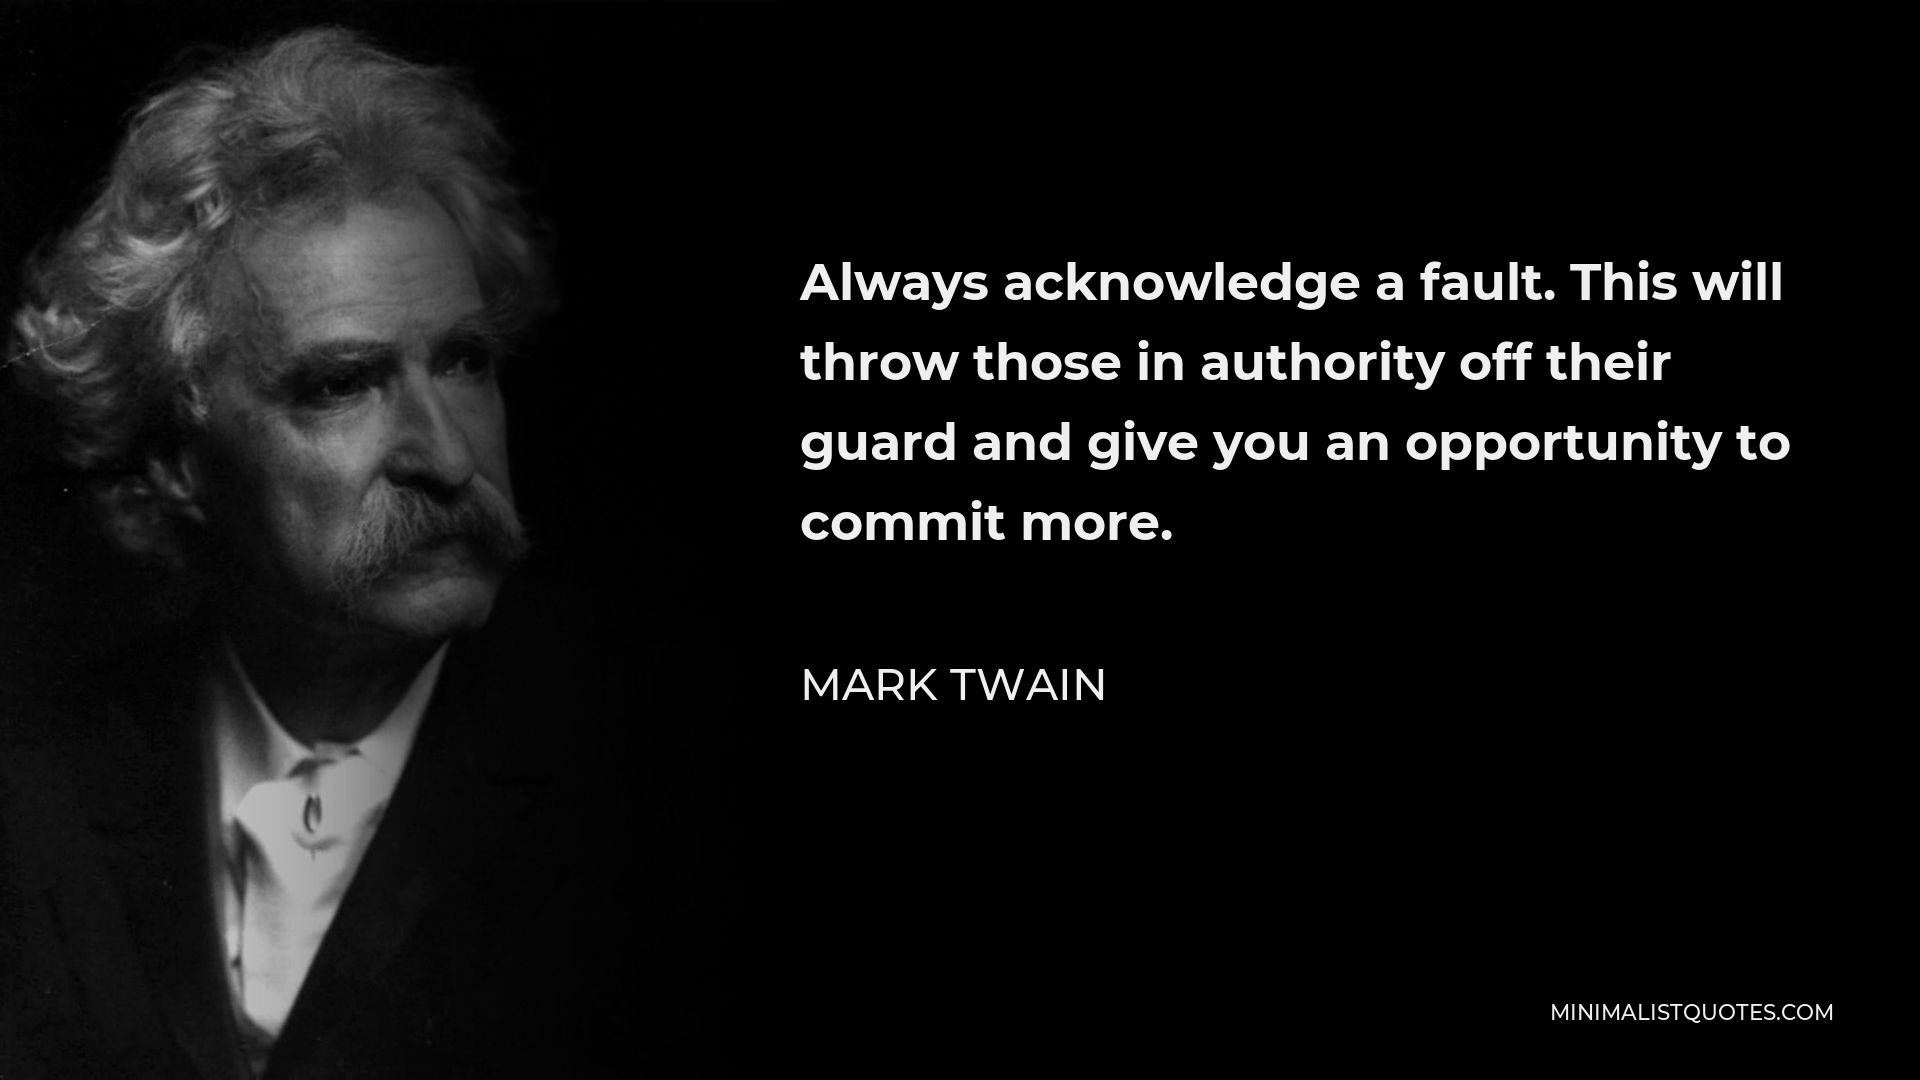 Mark Twain Quote - Always acknowledge a fault. This will throw those in authority off their guard and give you an opportunity to commit more.